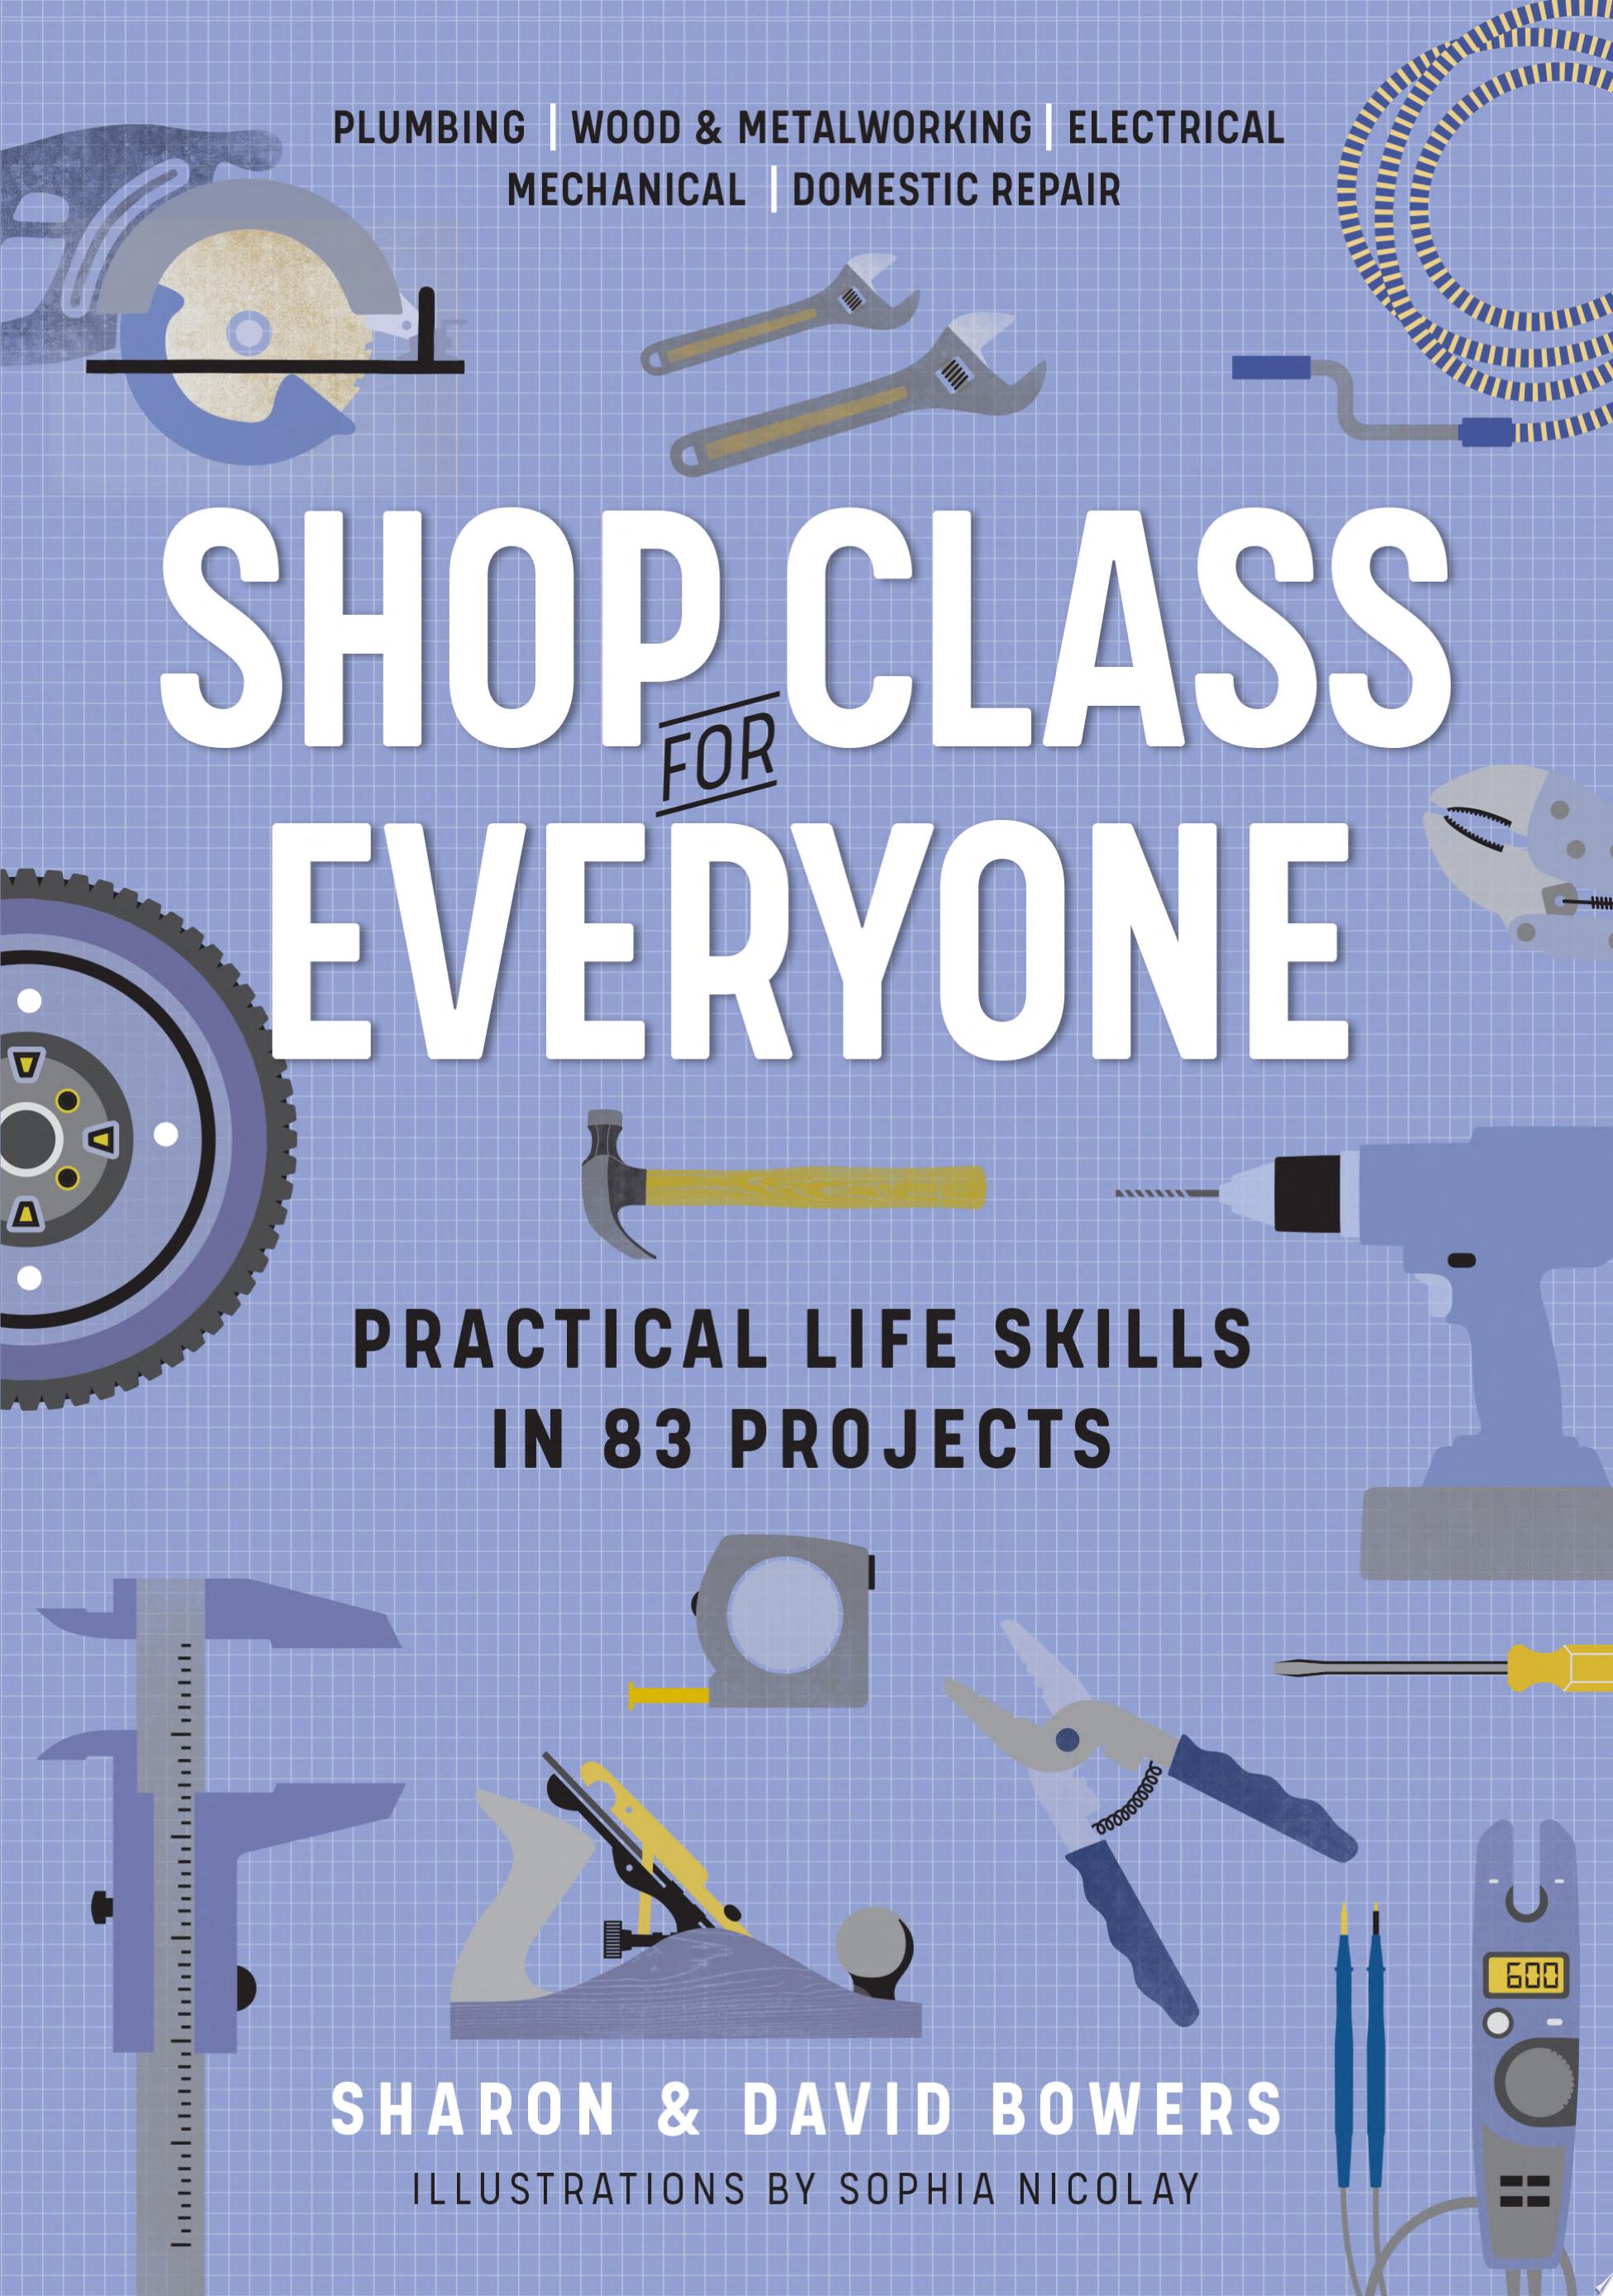 Image for "Shop Class for Everyone: Practical Life Skills in 83 Projects"